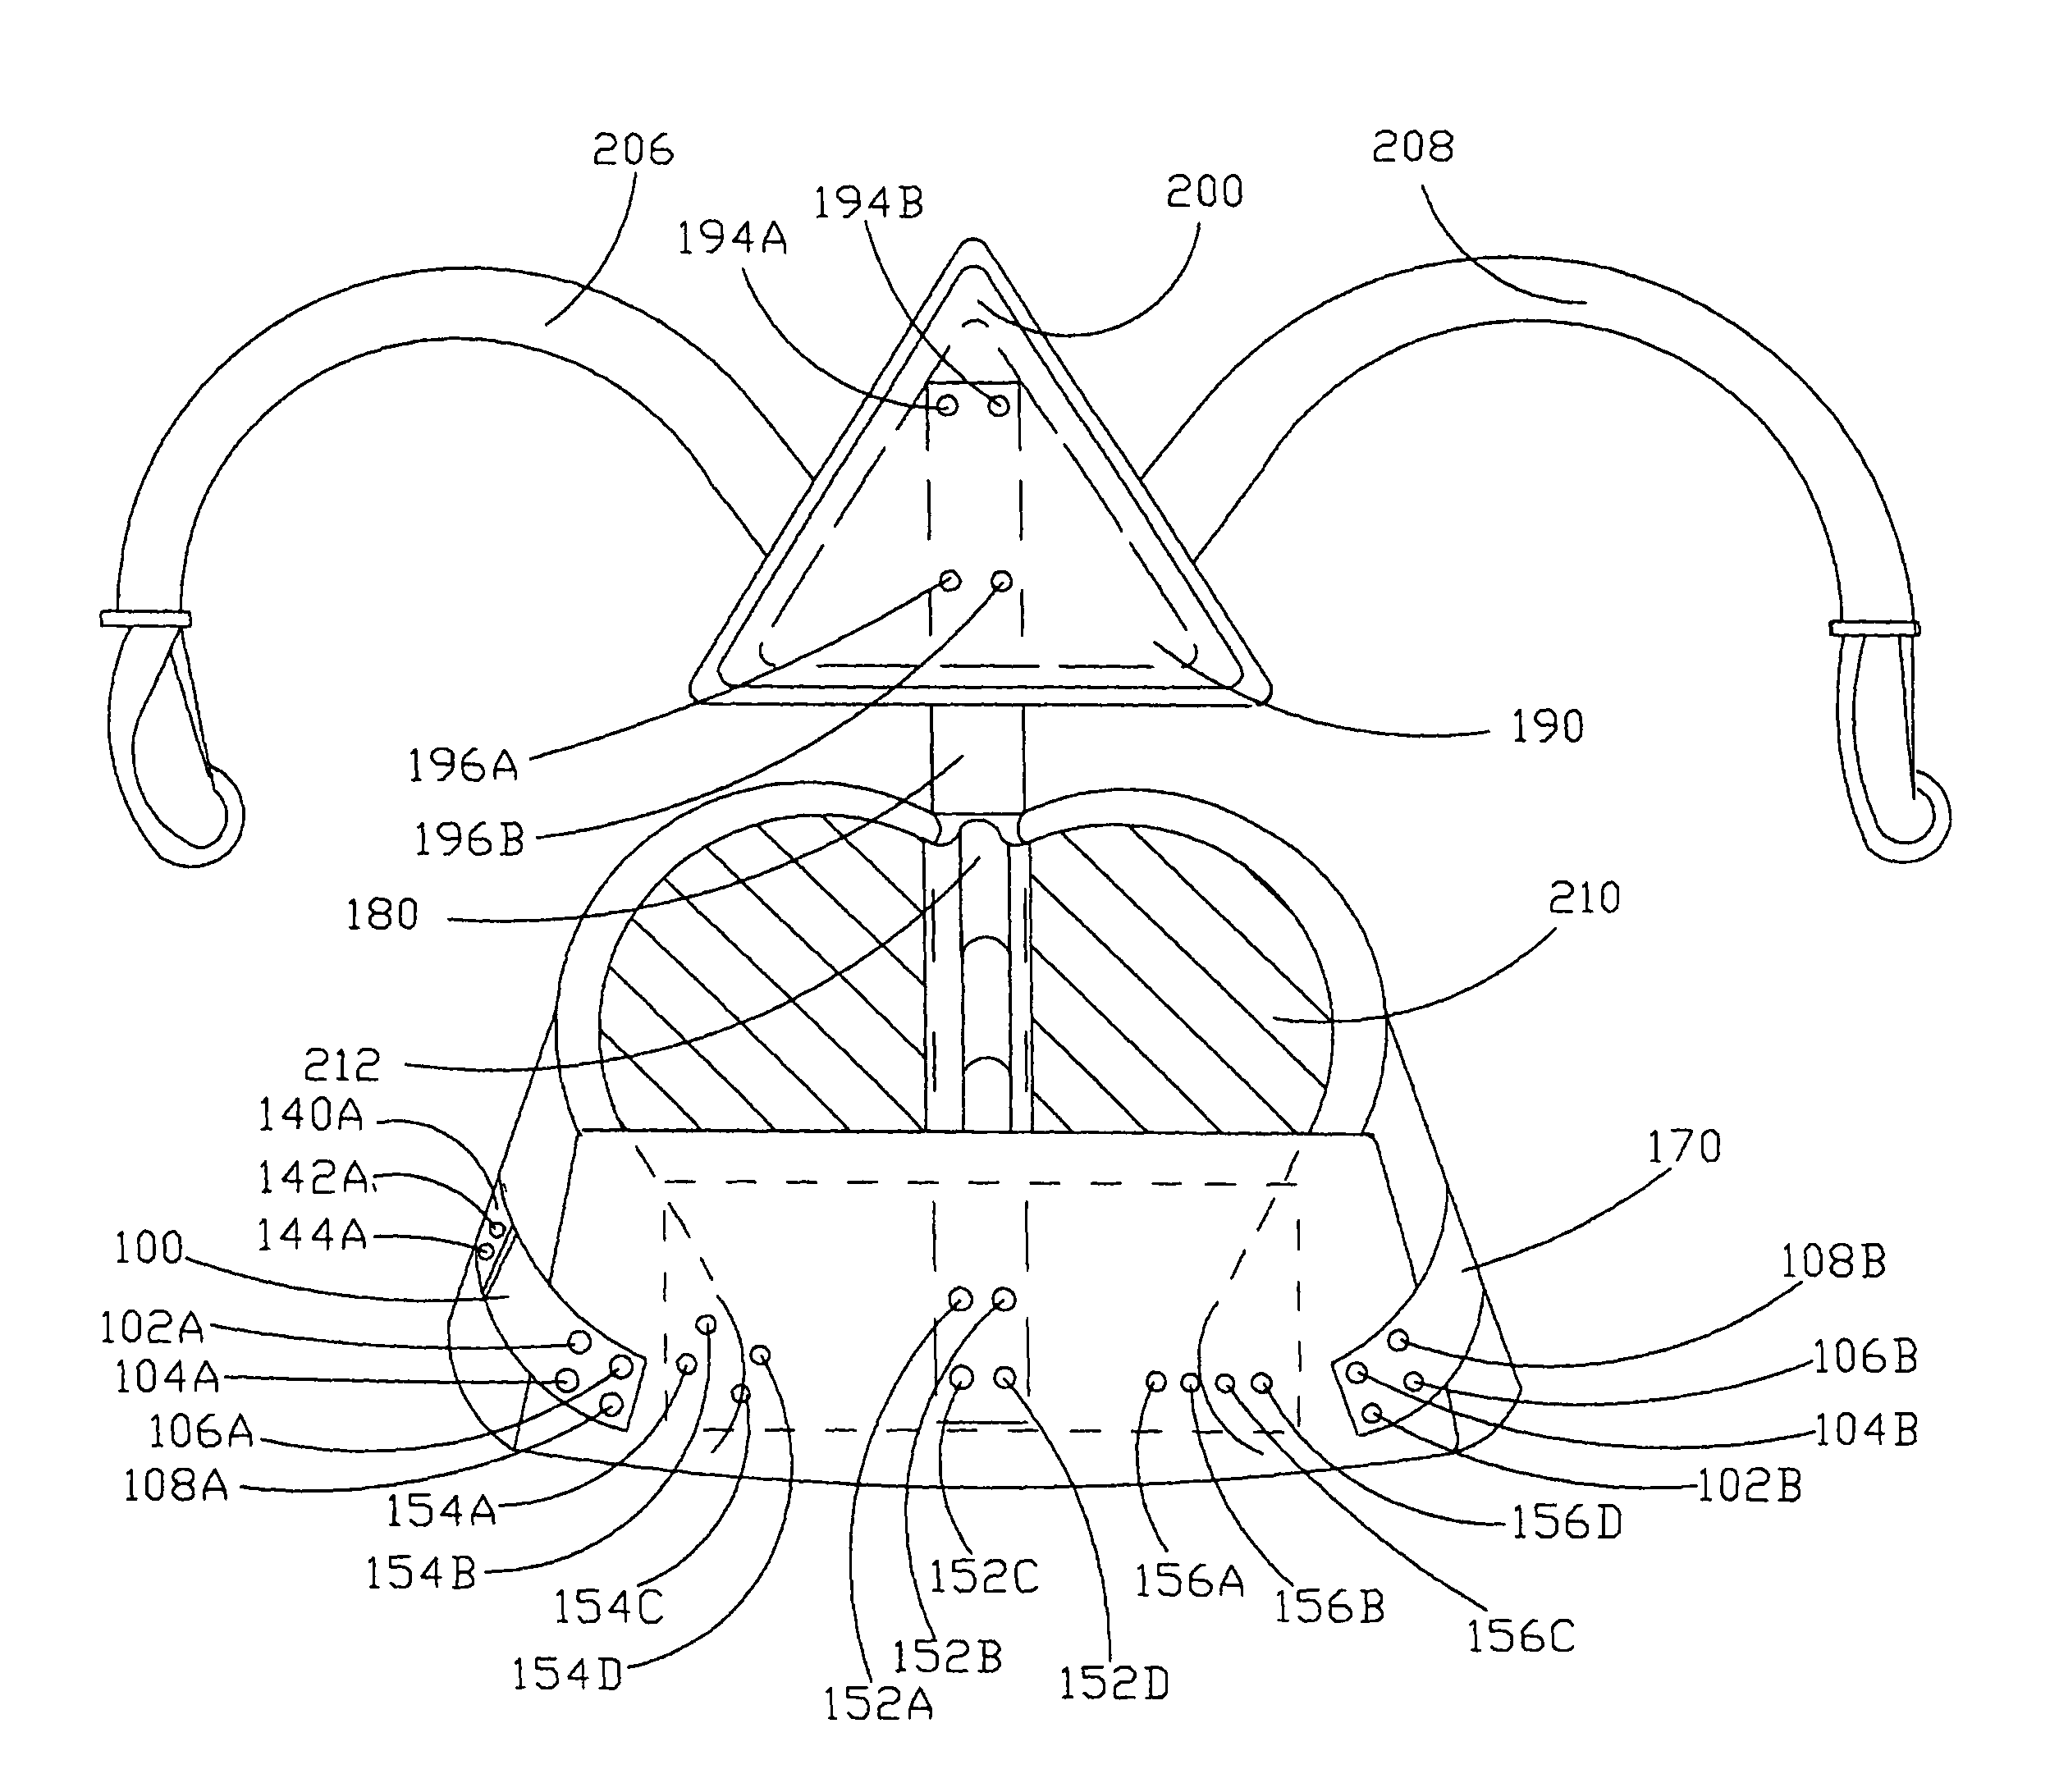 Apparatus for using a person's hips to carry the load of marching percussion equipment or other objects which are carried near waist-height and in front of a person